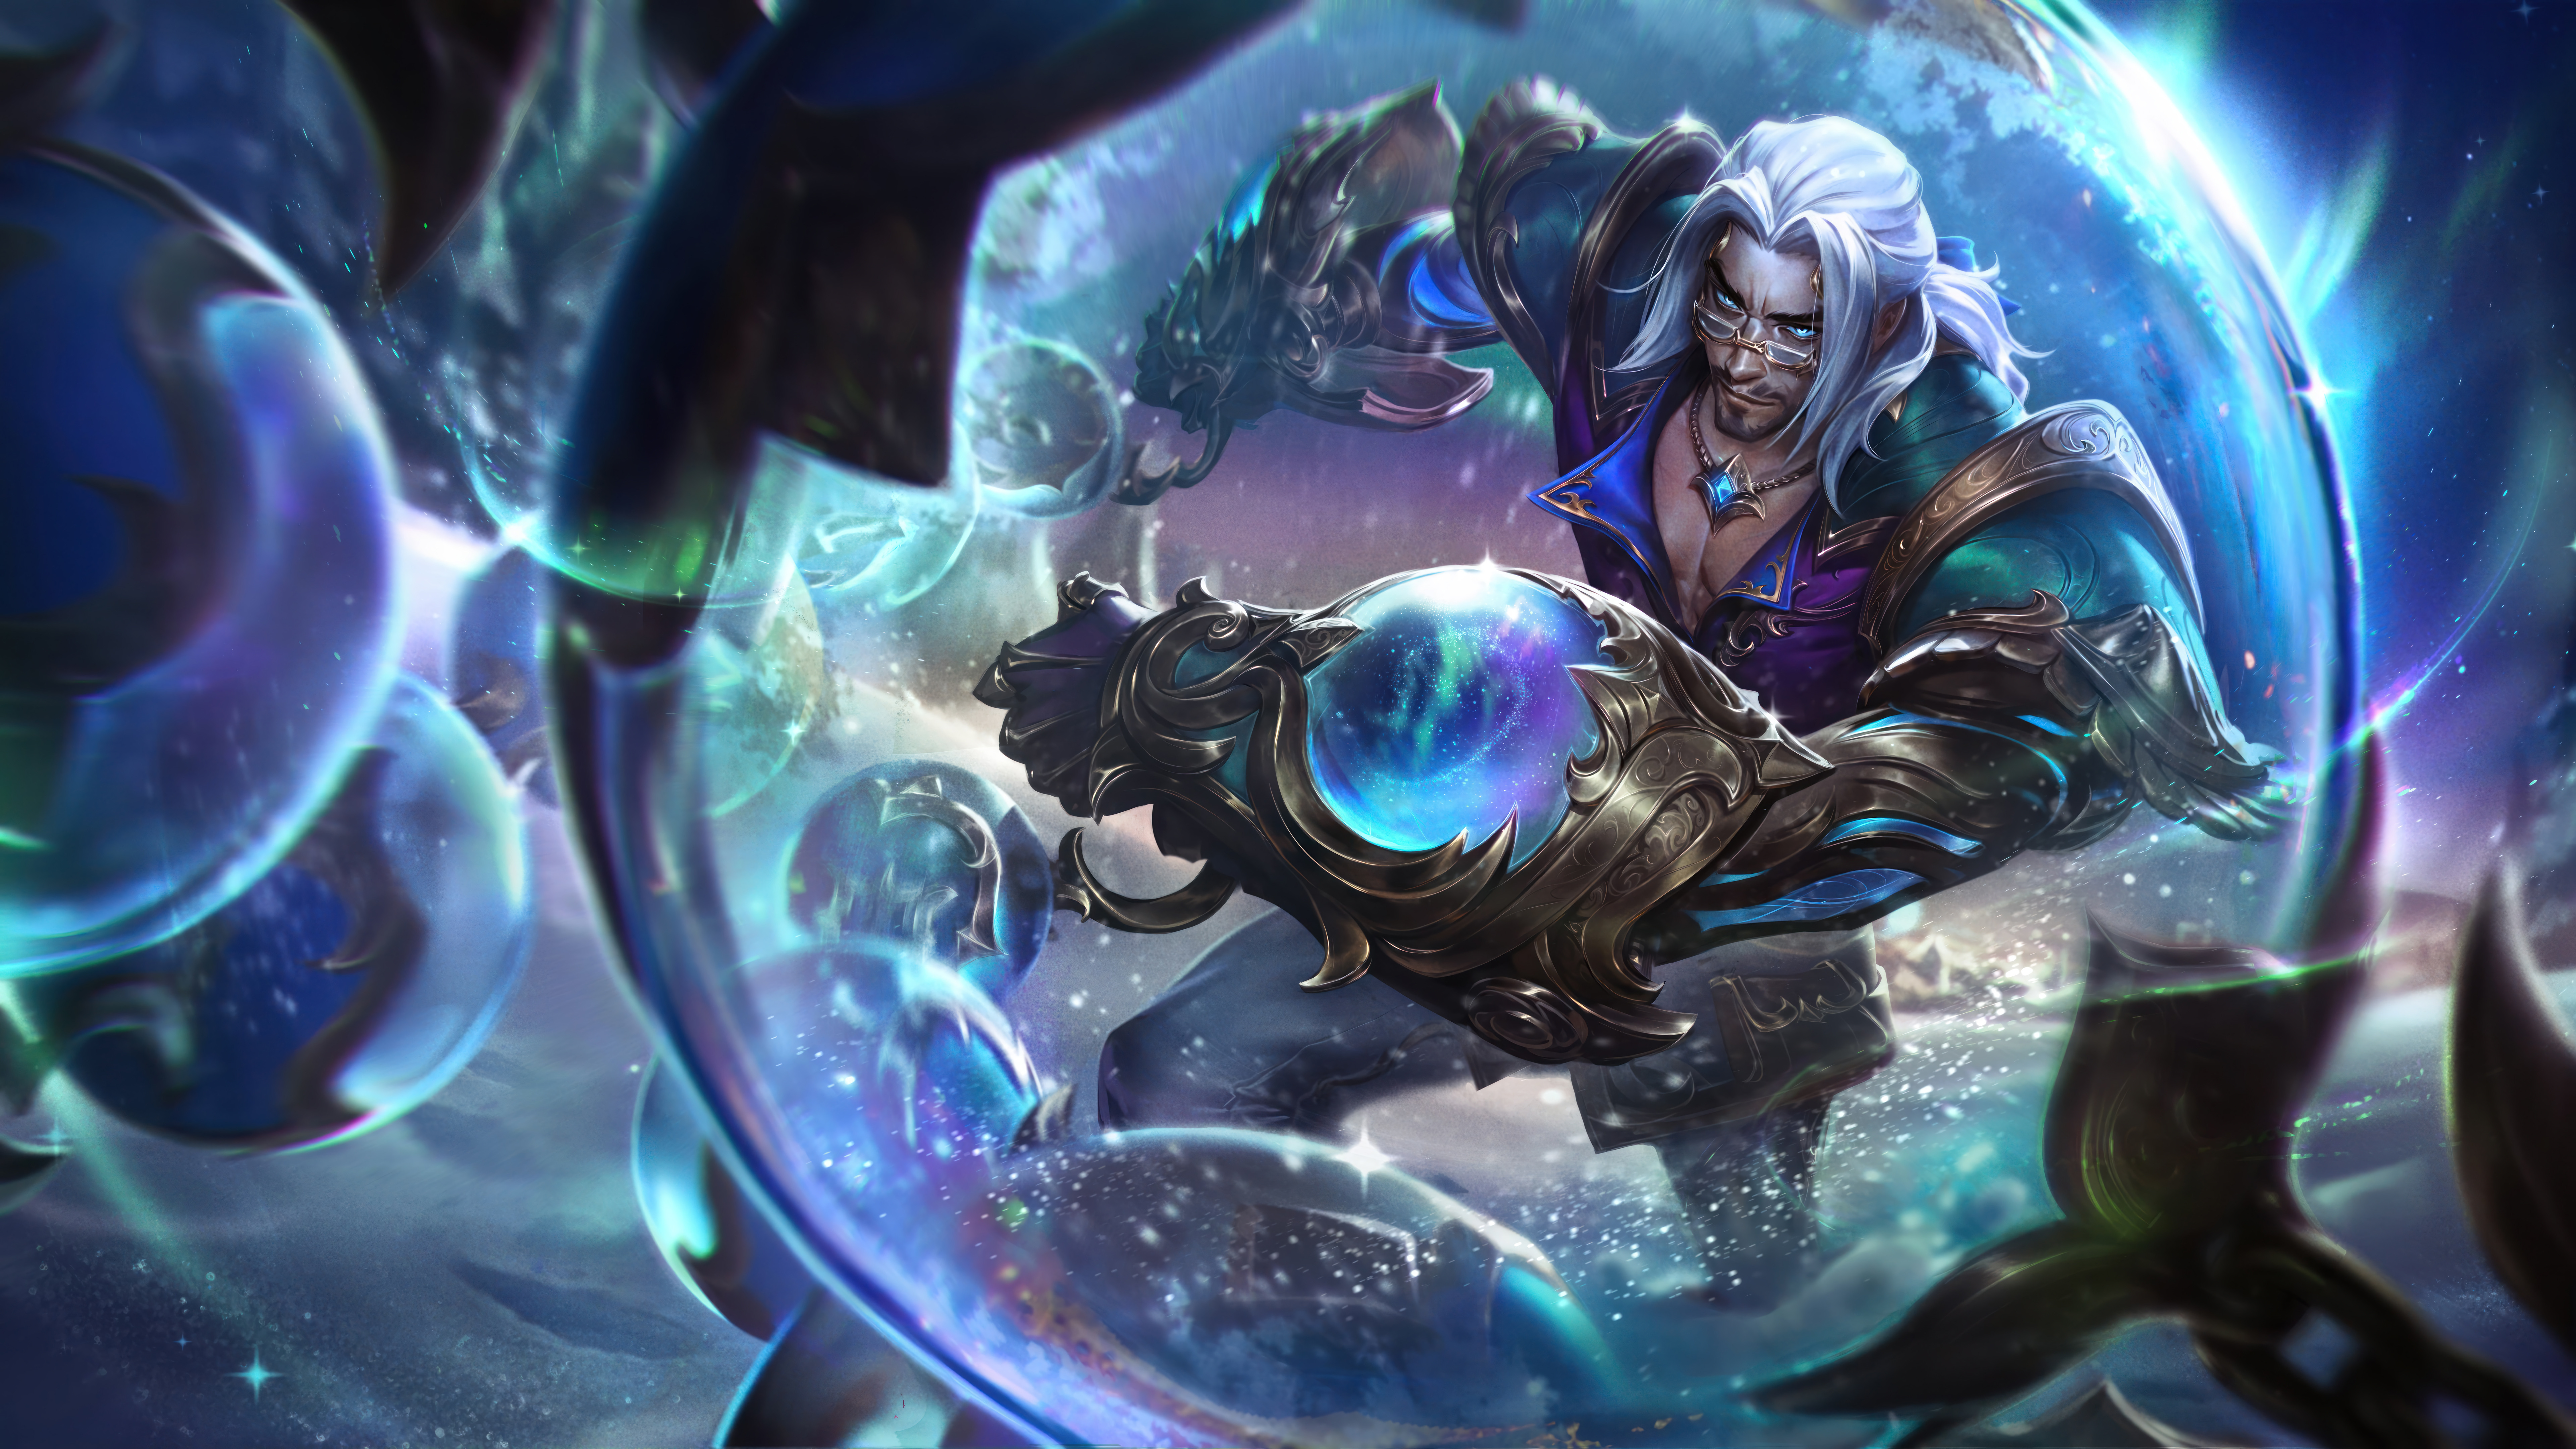 General 7680x4320 League of Legends digital art Riot Games GZG video games Winterblessed (League of Legends) Sylas (League of Legends) video game characters 4K video game art aurorae video game men glasses moustache closed mouth night lights stars